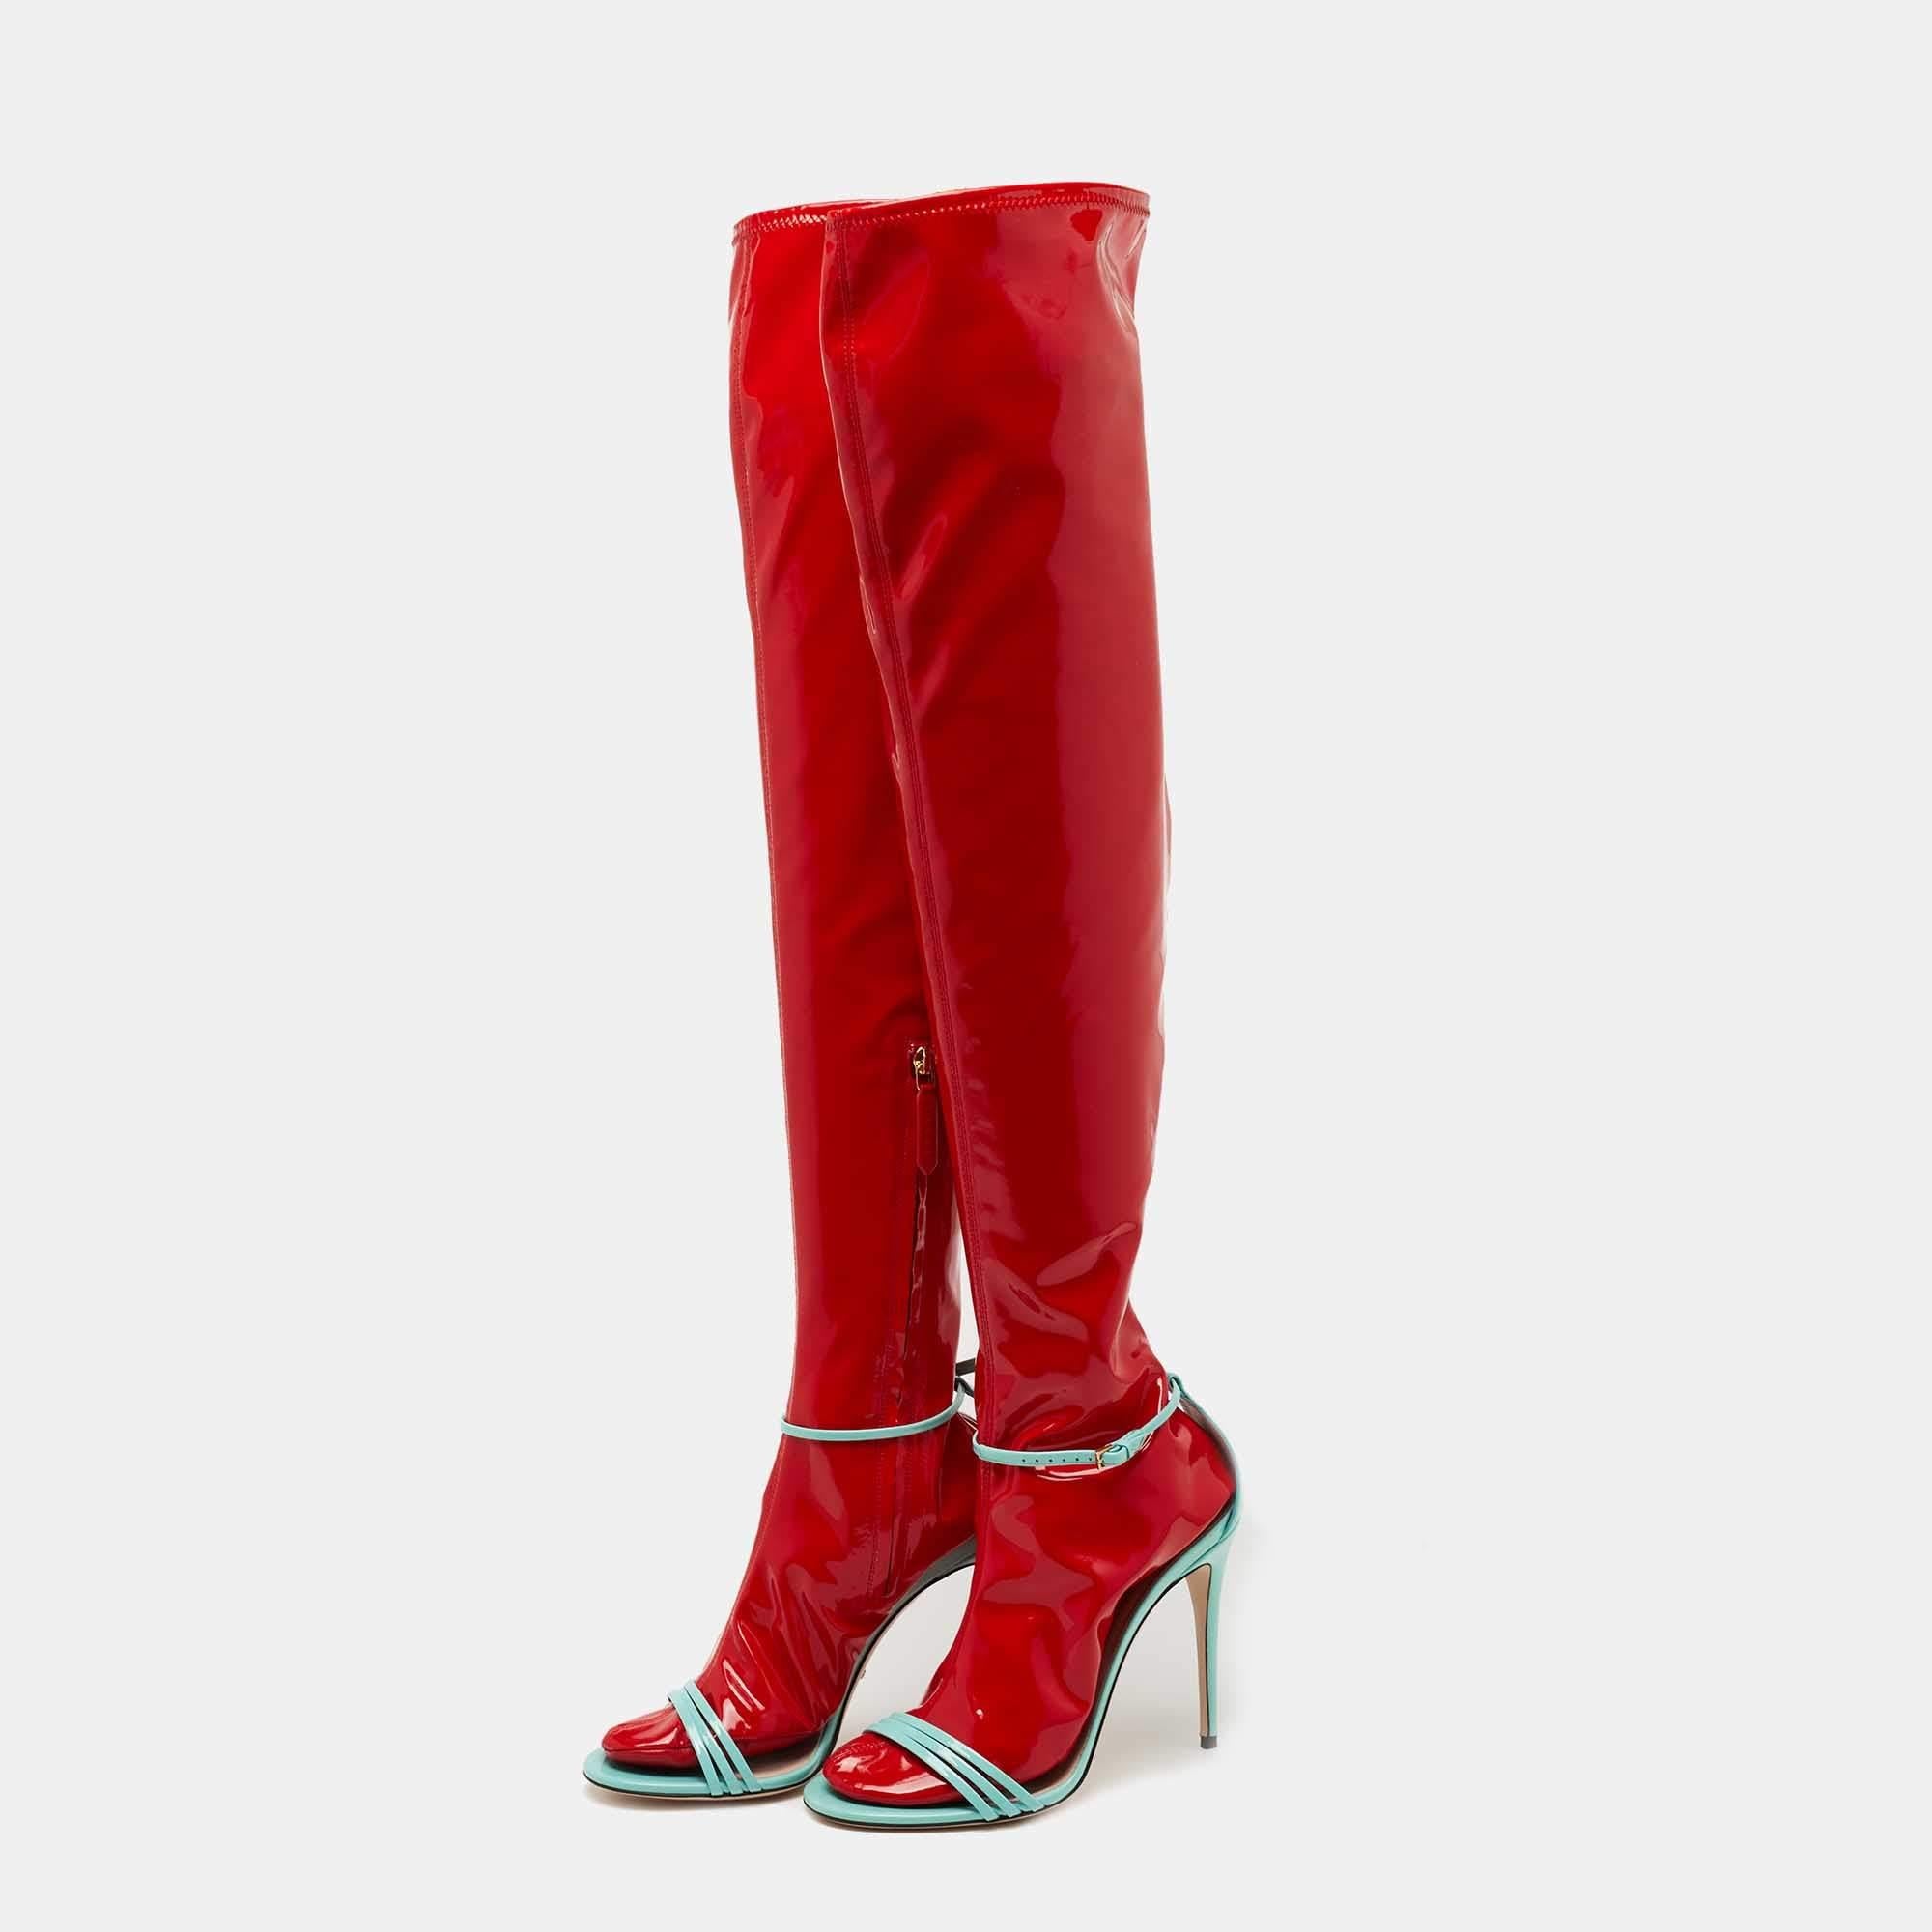 Women's Gucci Red PVC and Patent Knee High Latex Socks Sandals Size 40